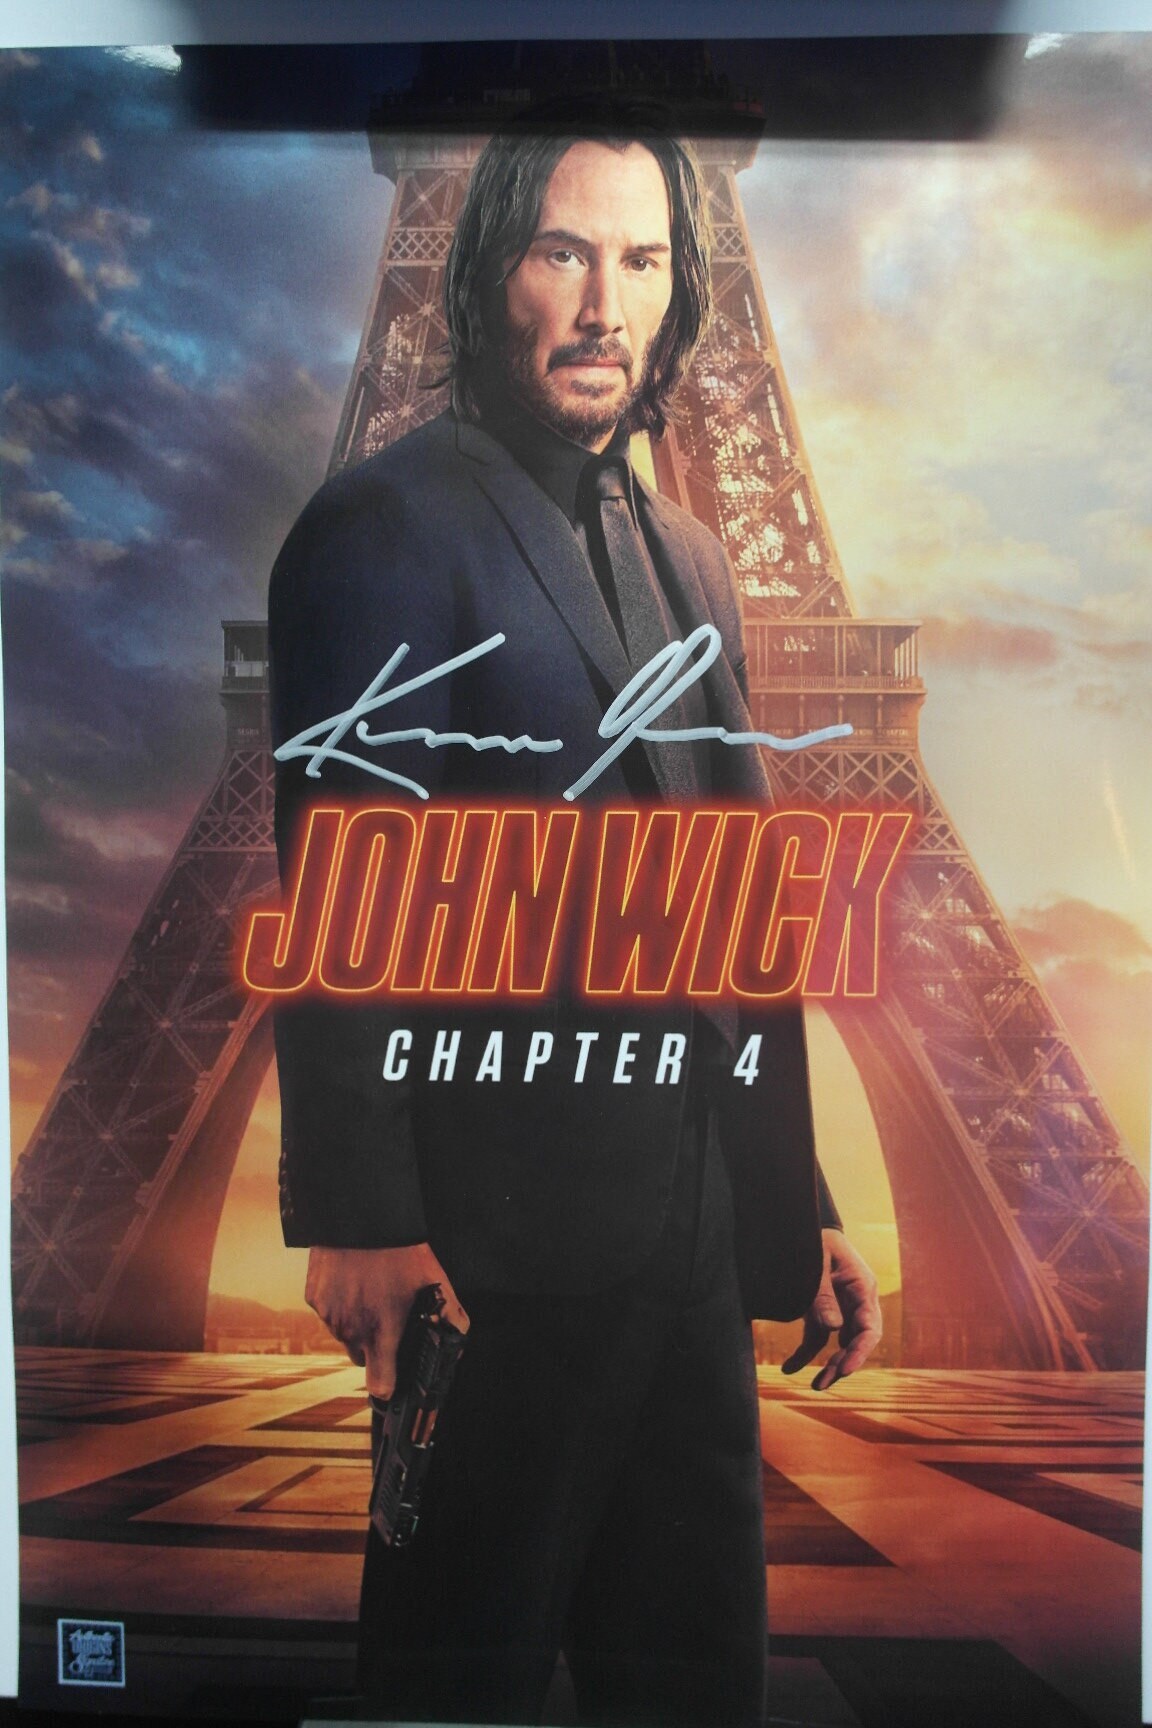 JOHN WICK Chapter 2 Cast(x6) Authentic Hand-Signed Keanu Reeves 11x14  Photo